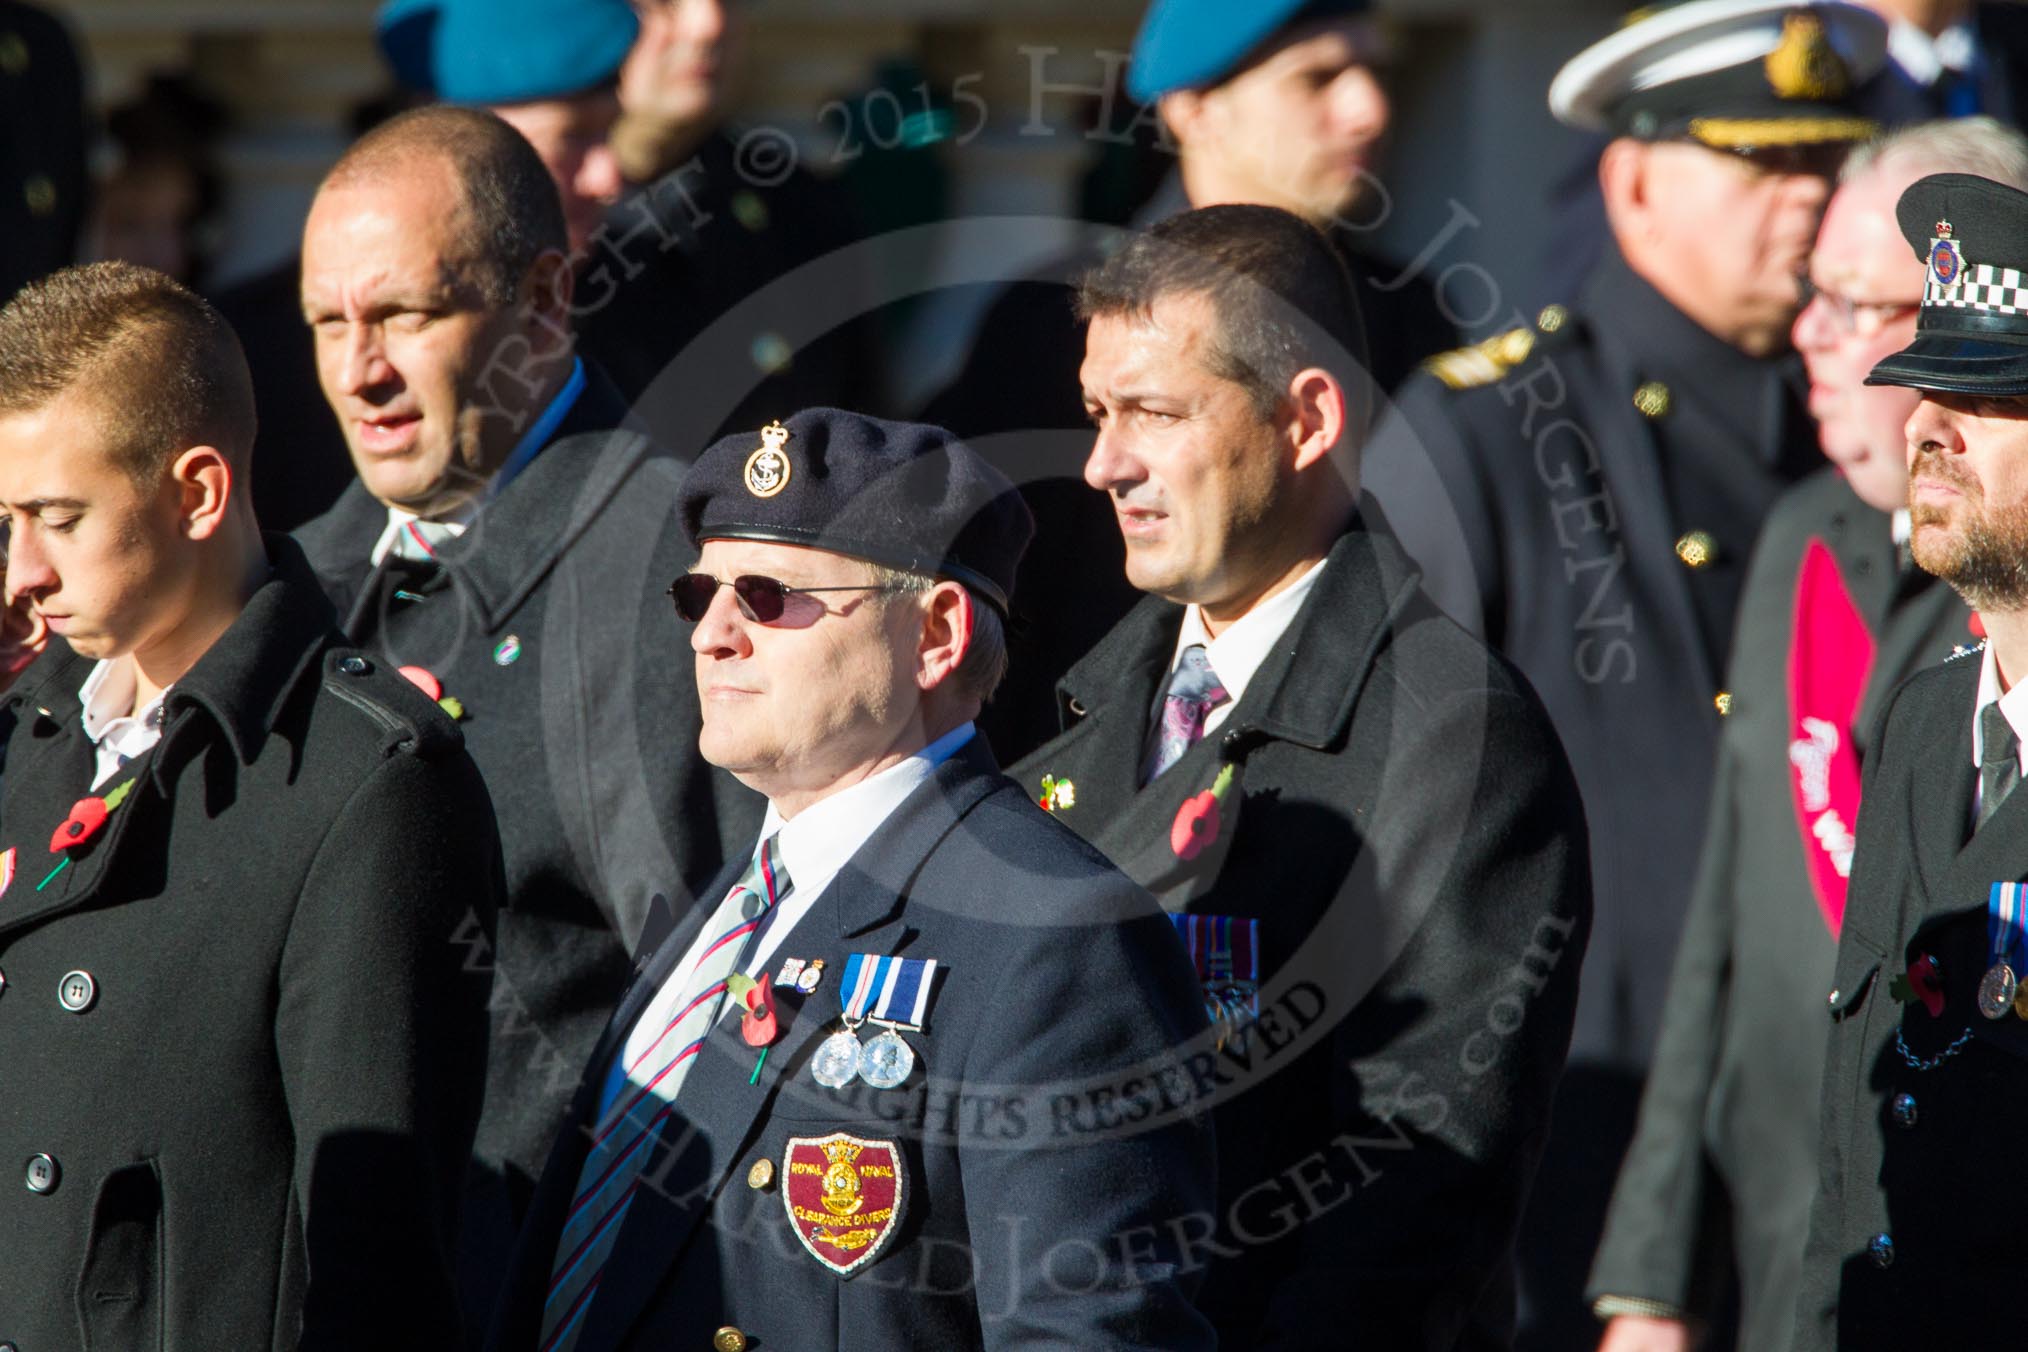 Remembrance Sunday Cenotaph March Past 2013: F7 - Gallantry Medallists League..
Press stand opposite the Foreign Office building, Whitehall, London SW1,
London,
Greater London,
United Kingdom,
on 10 November 2013 at 11:50, image #802